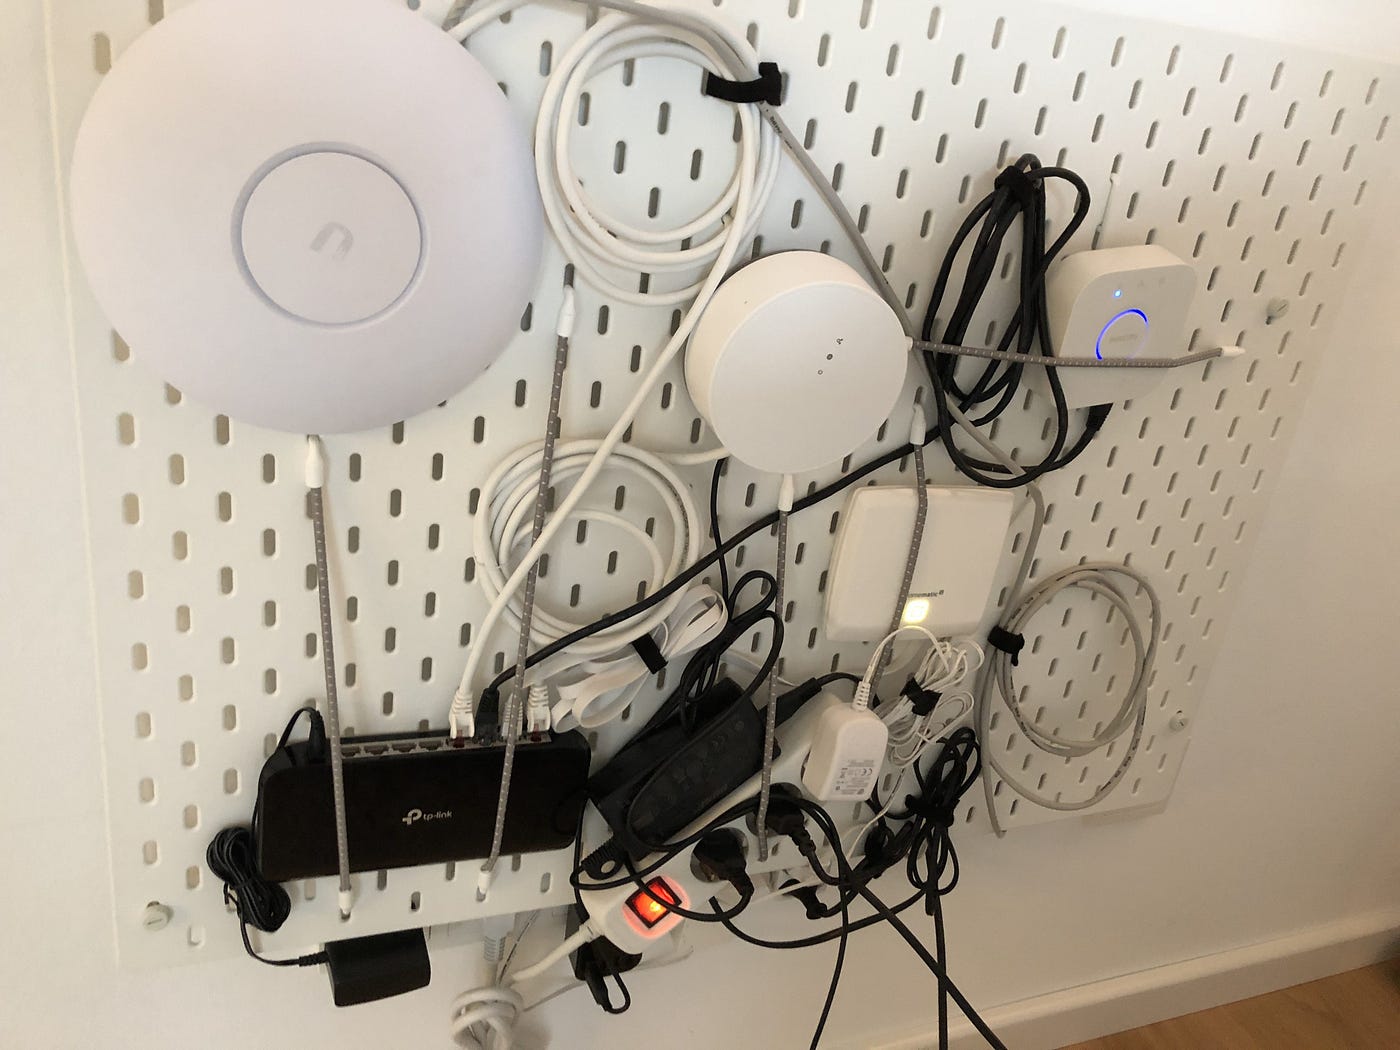 Using IKEA Skådis for networking gear and cable management | by Adrian  Thomas | Medium